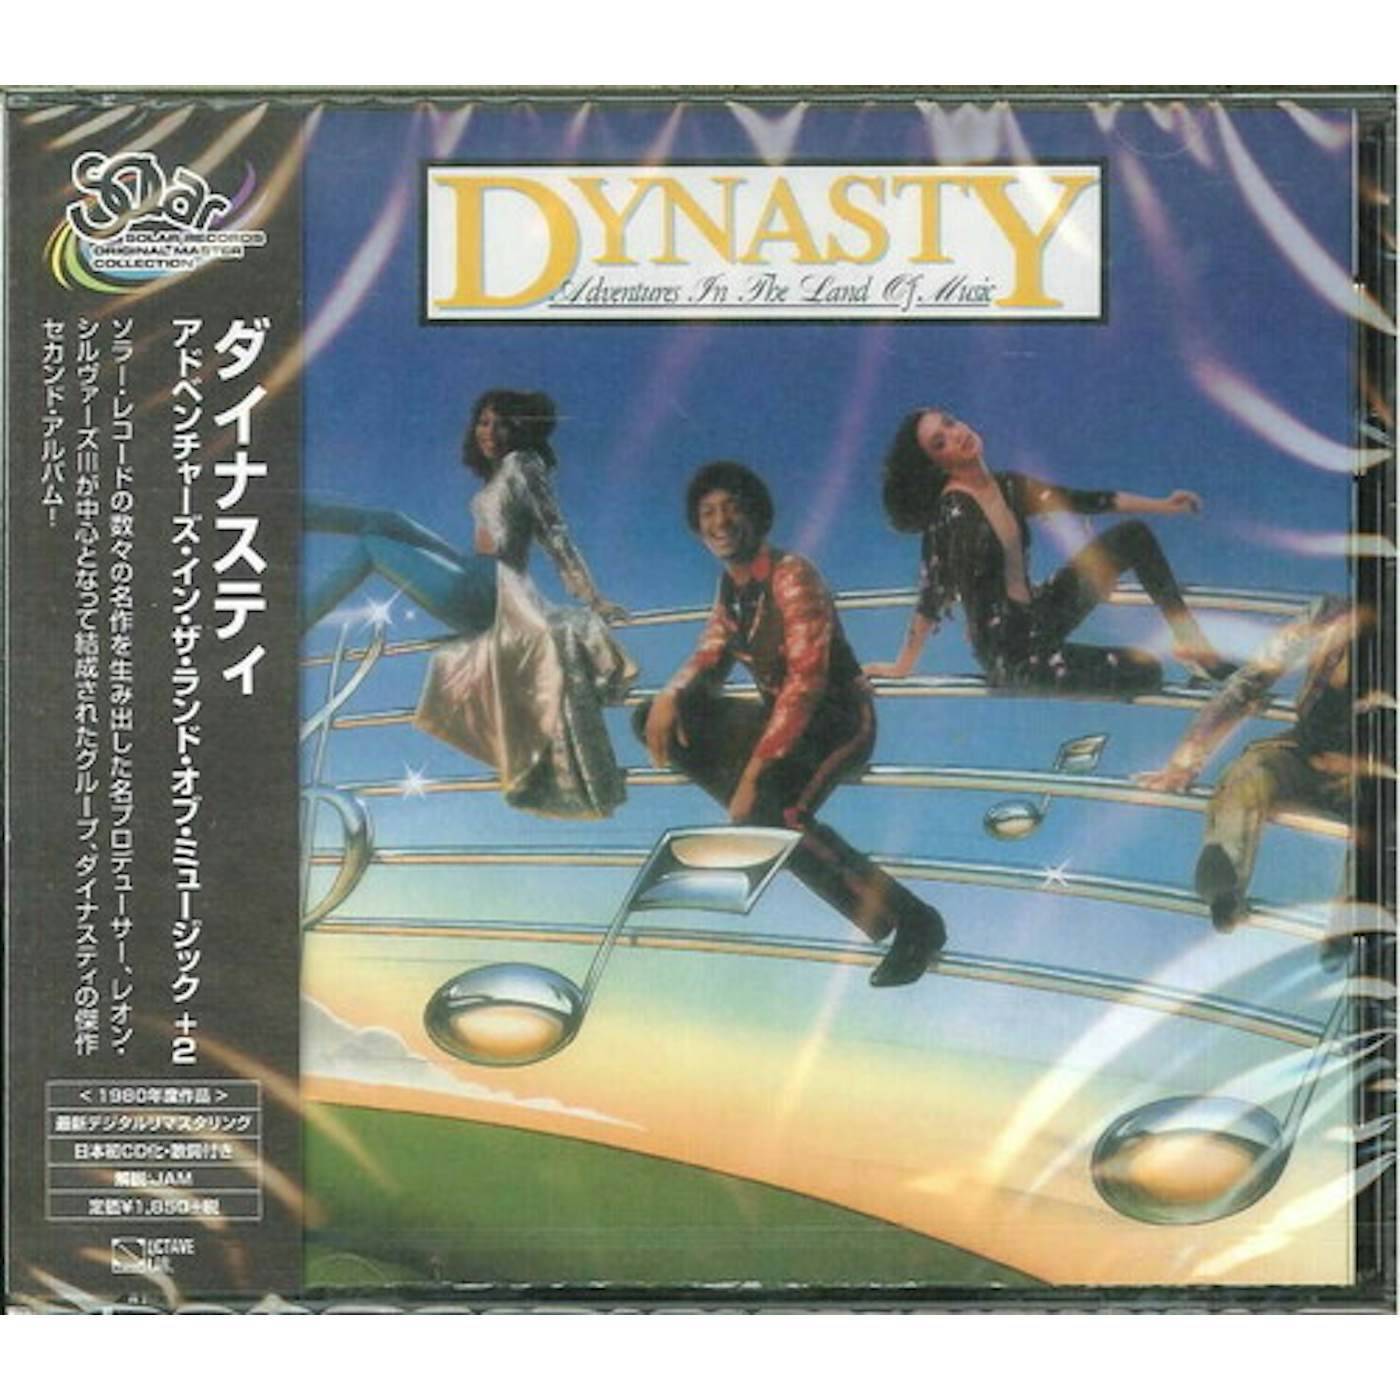 Dynasty ADVENTURES IN LAND OF MUSIC + 2 CD